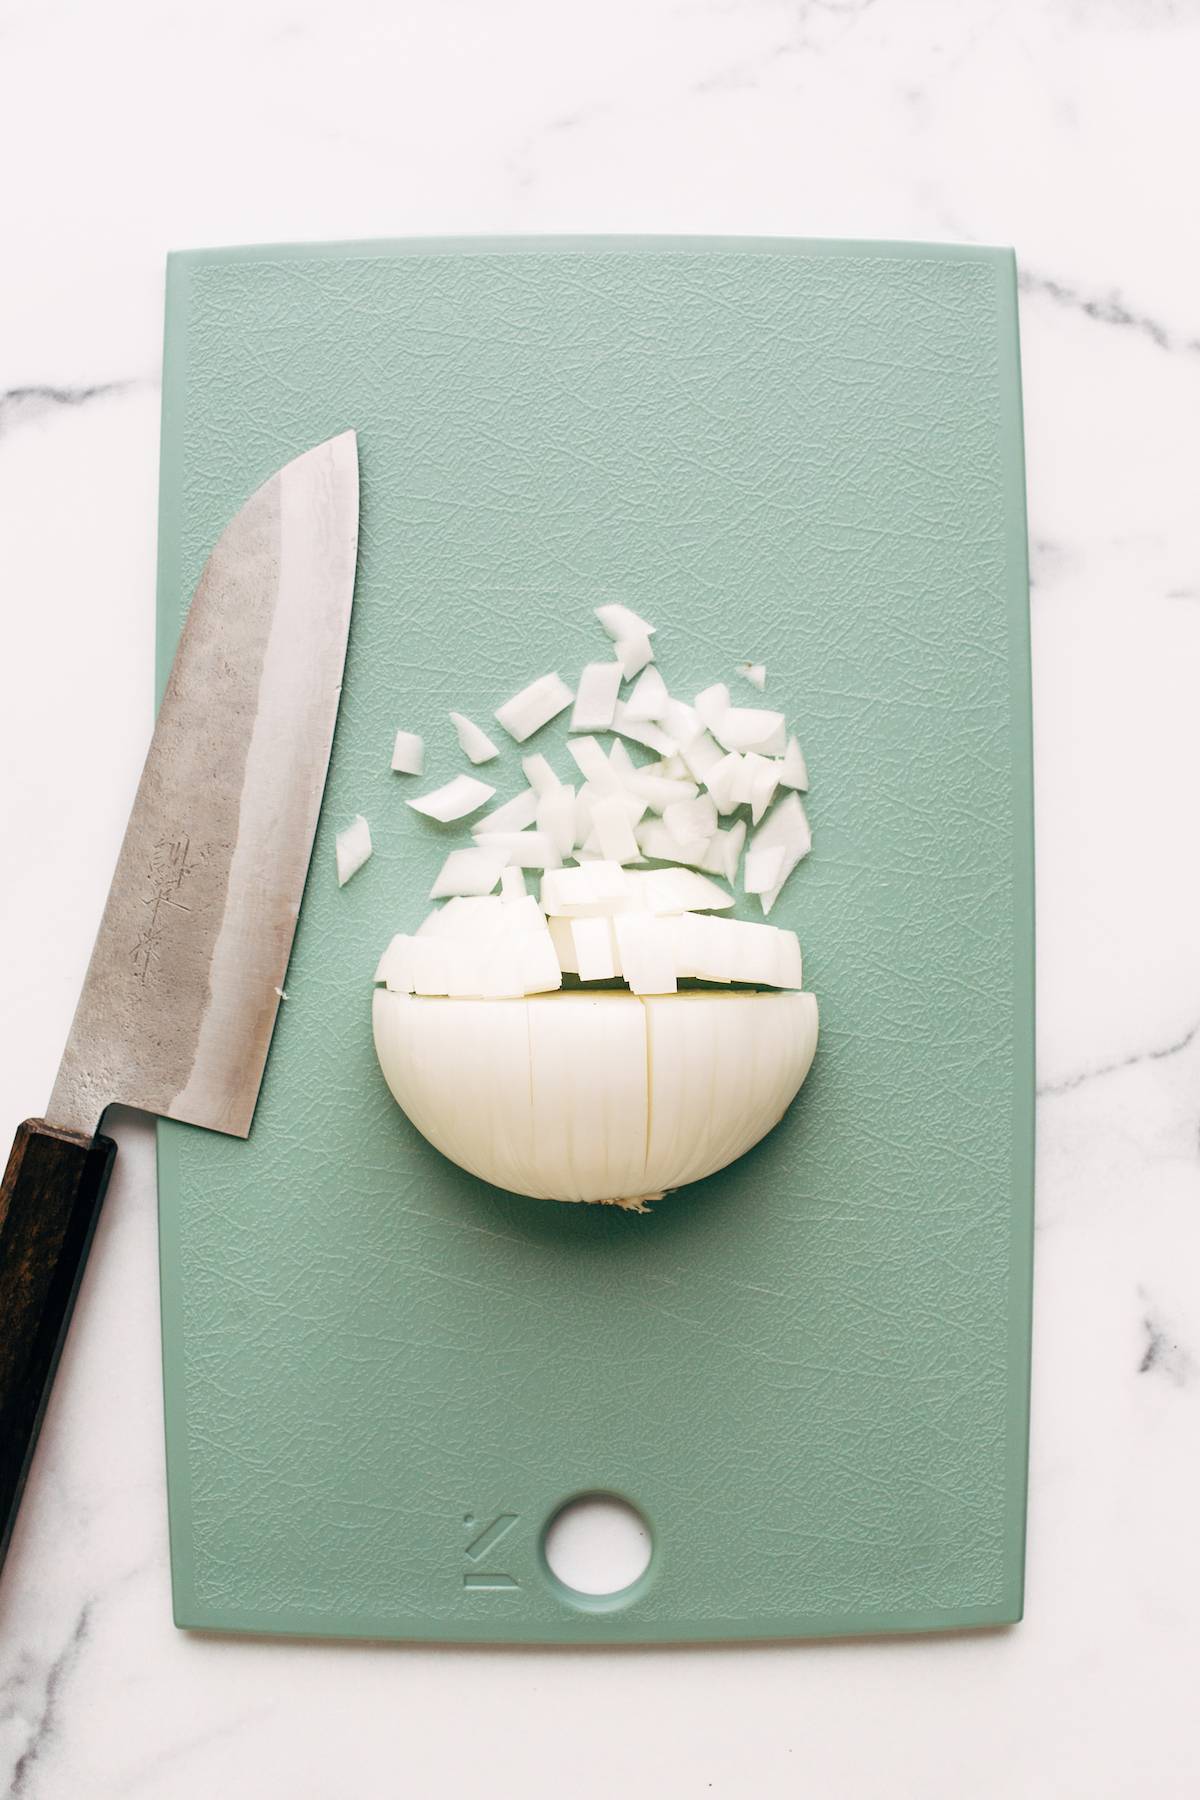 Half of an onion cut on a cutting board with a knife.